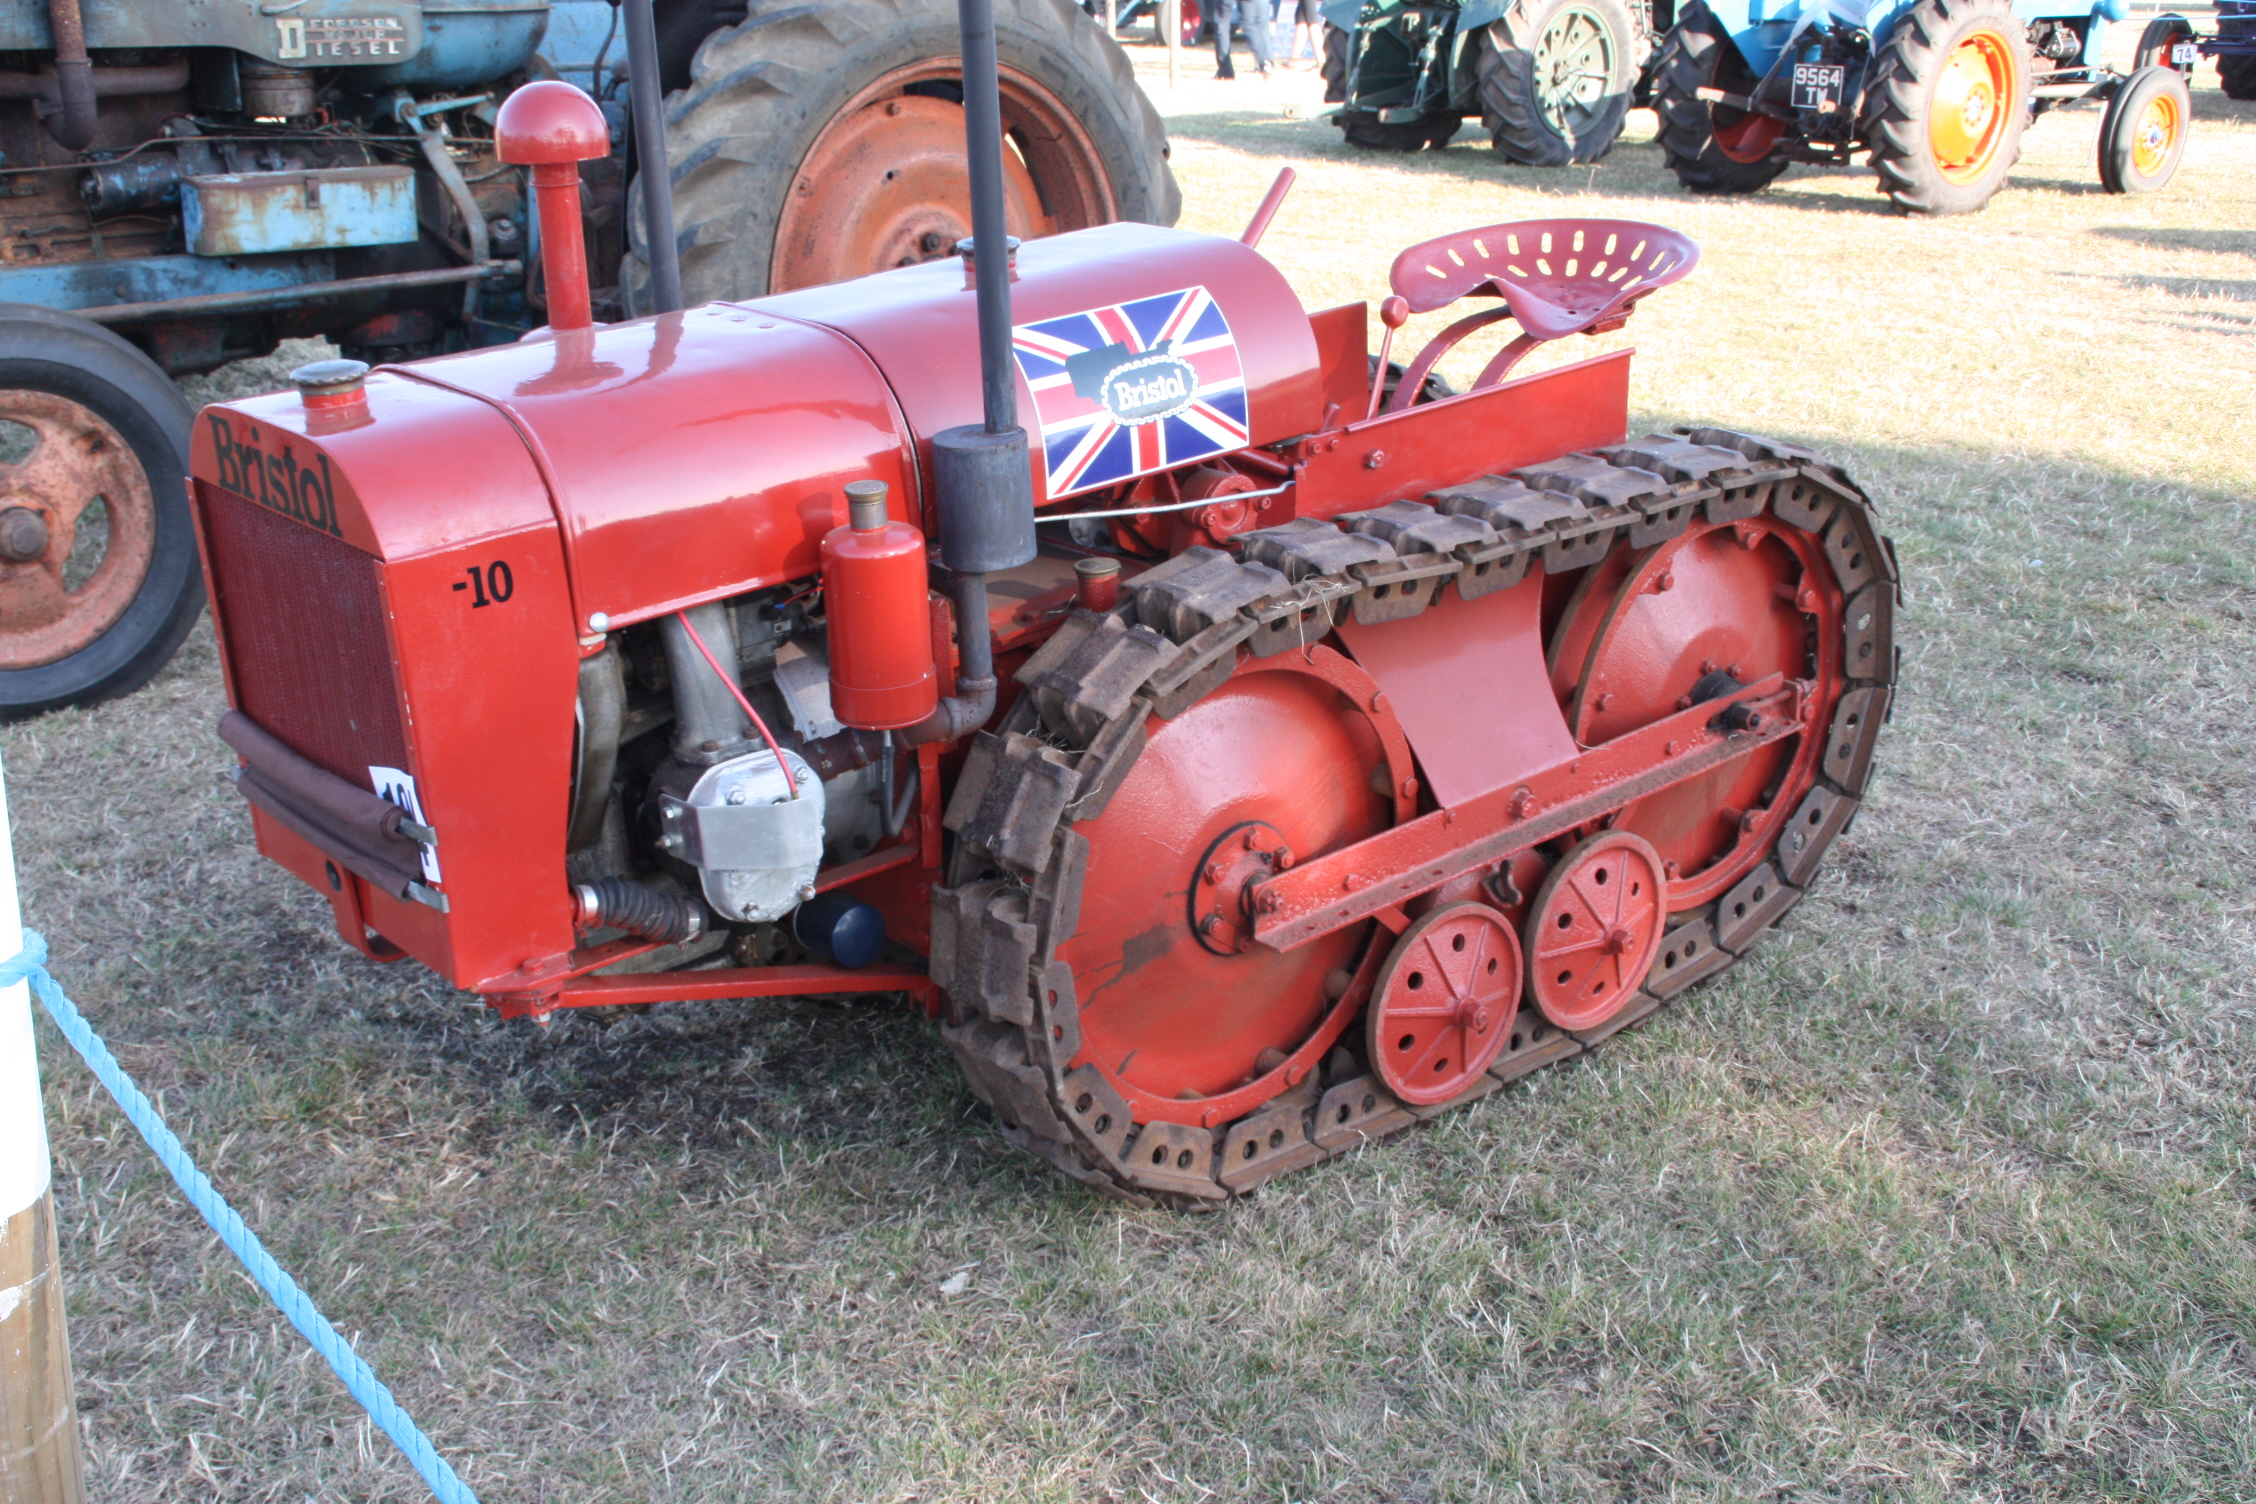 Bristol 10 sn 1275 with Roadless tracks at the Essex Country Show 2009